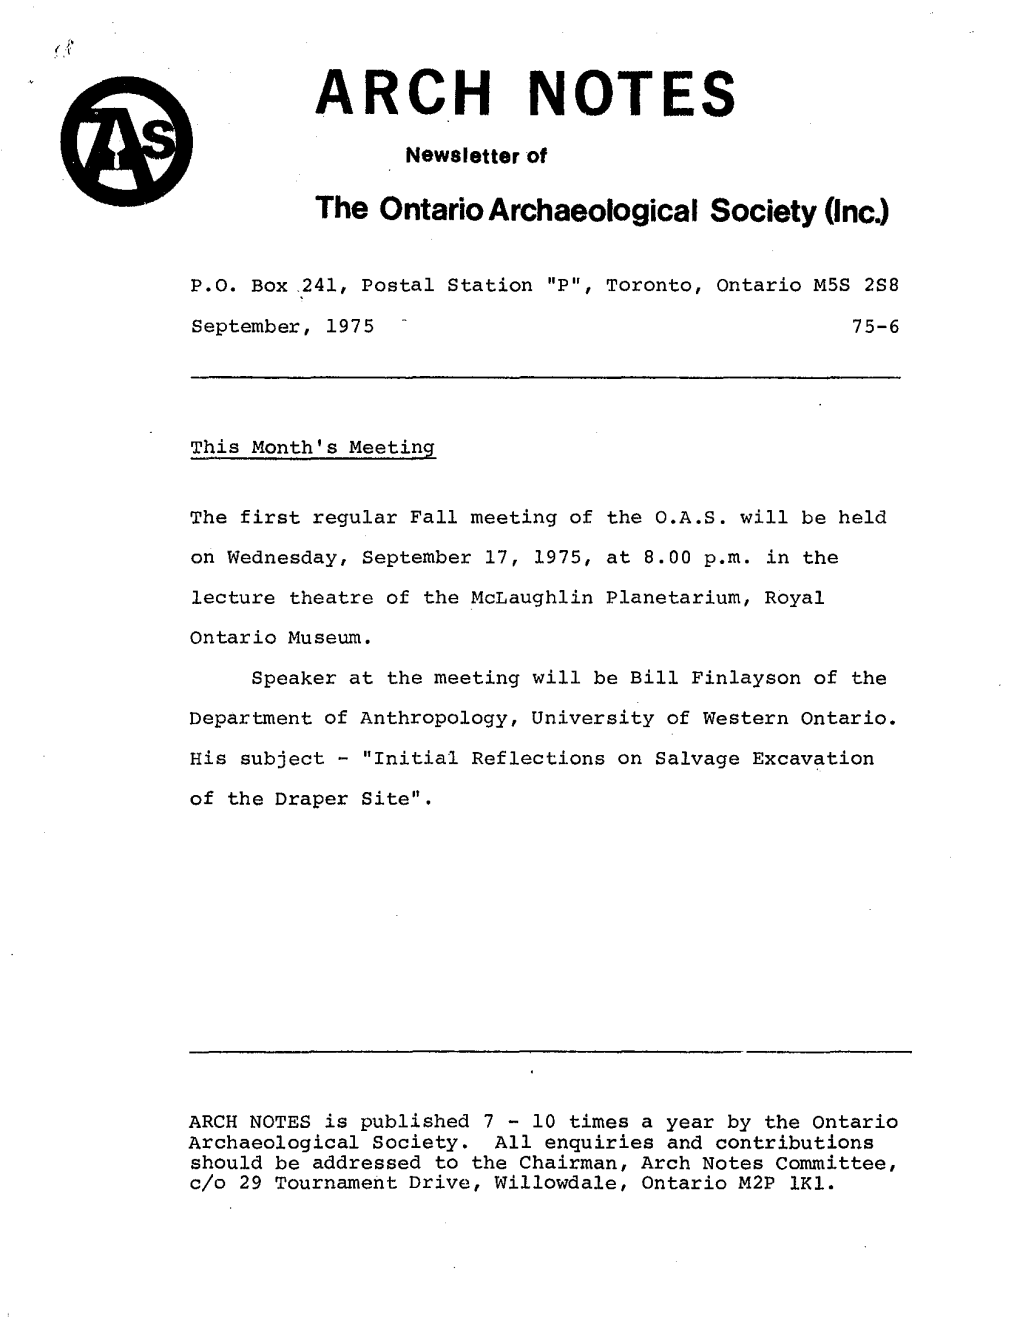 ARCH NOTES Newsletter of the Ontario Archaeological Society (Inc.)